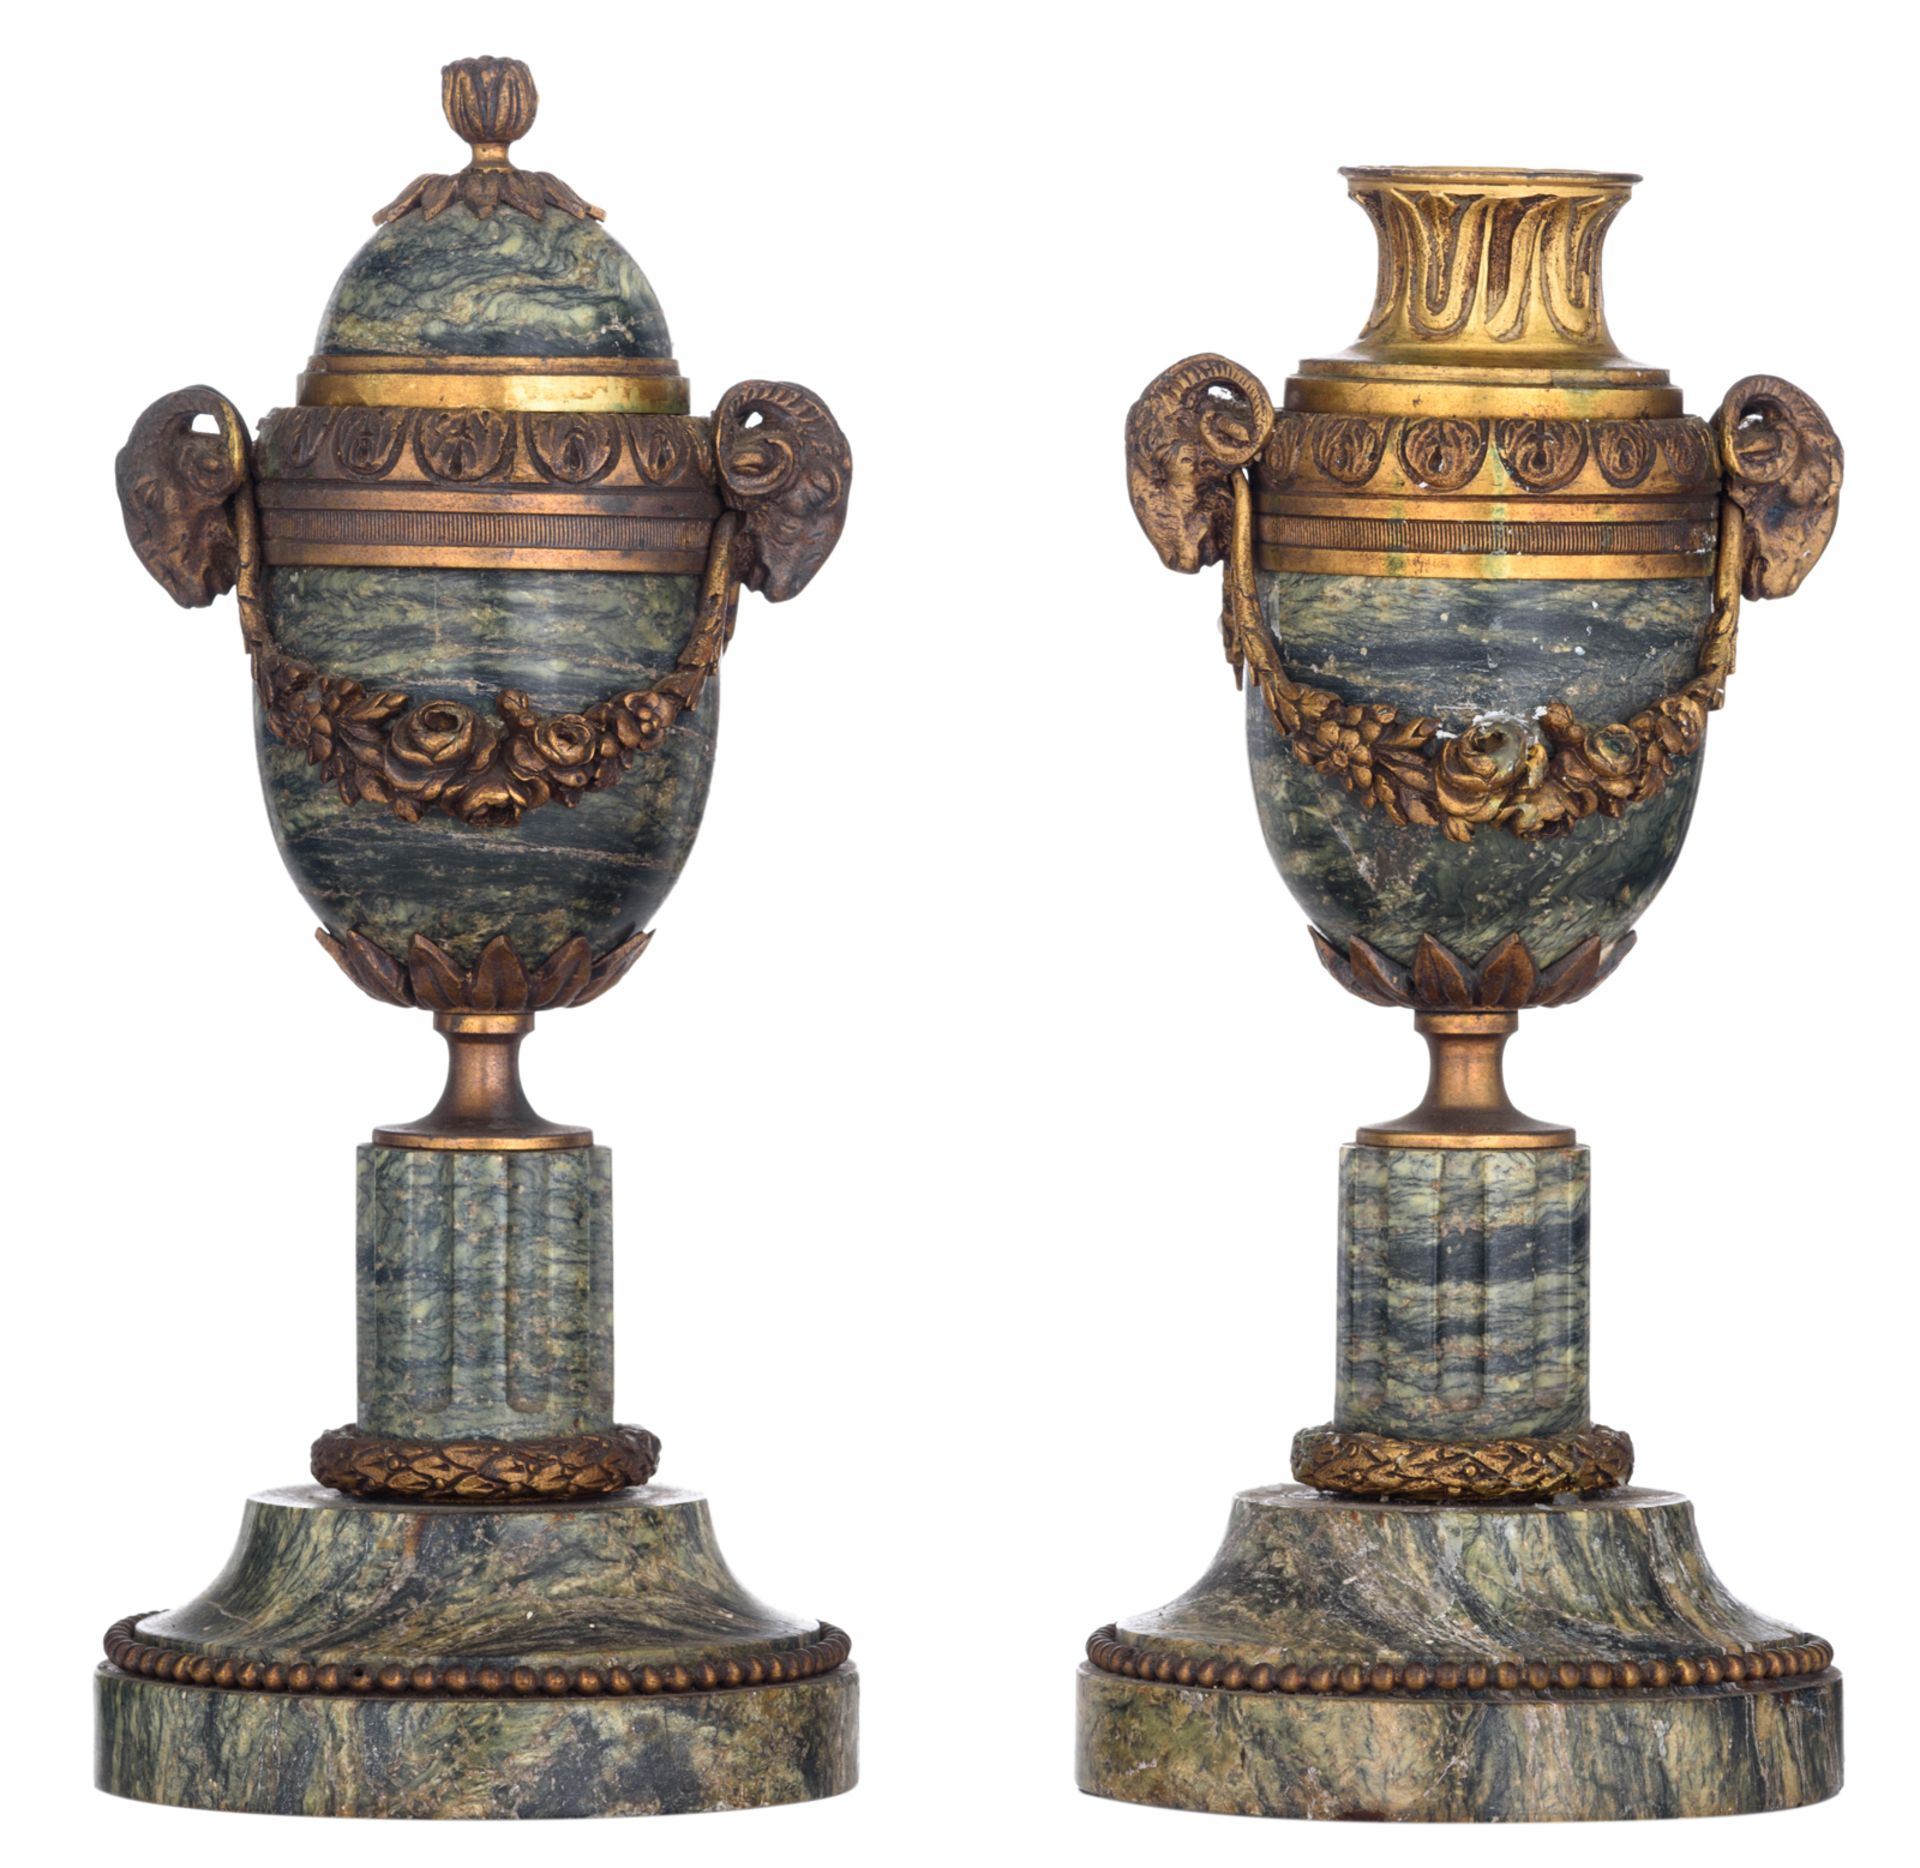 A fine pair of Neoclassical vert de mer marble cassolettes, with gilt bronze mounts, transformable i